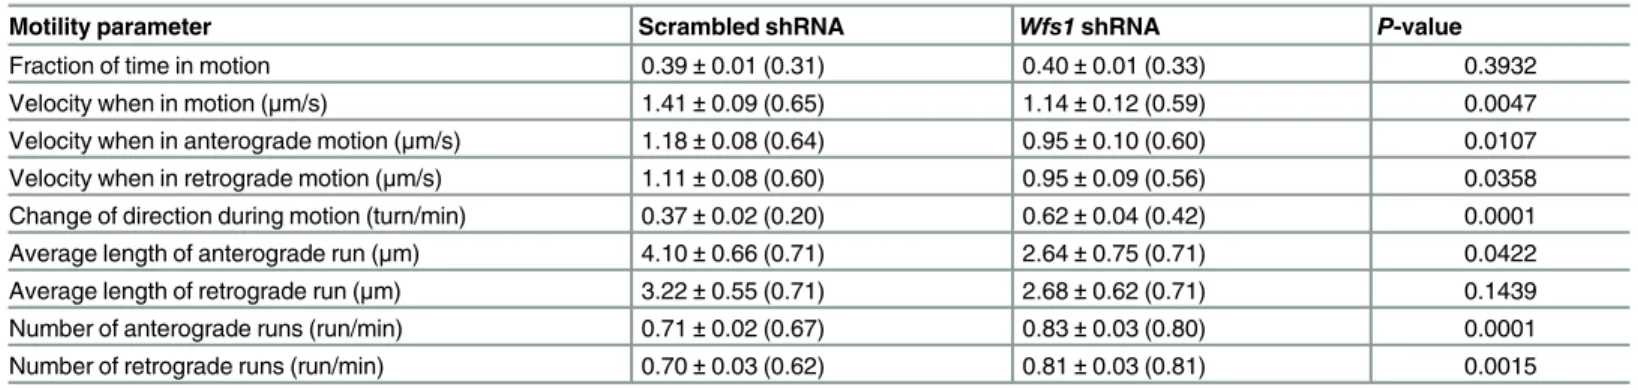 Table 1. Parameters of mitochondrial trafficking in neurons transfected with scrambled shRNA or Wfs1 shRNA.